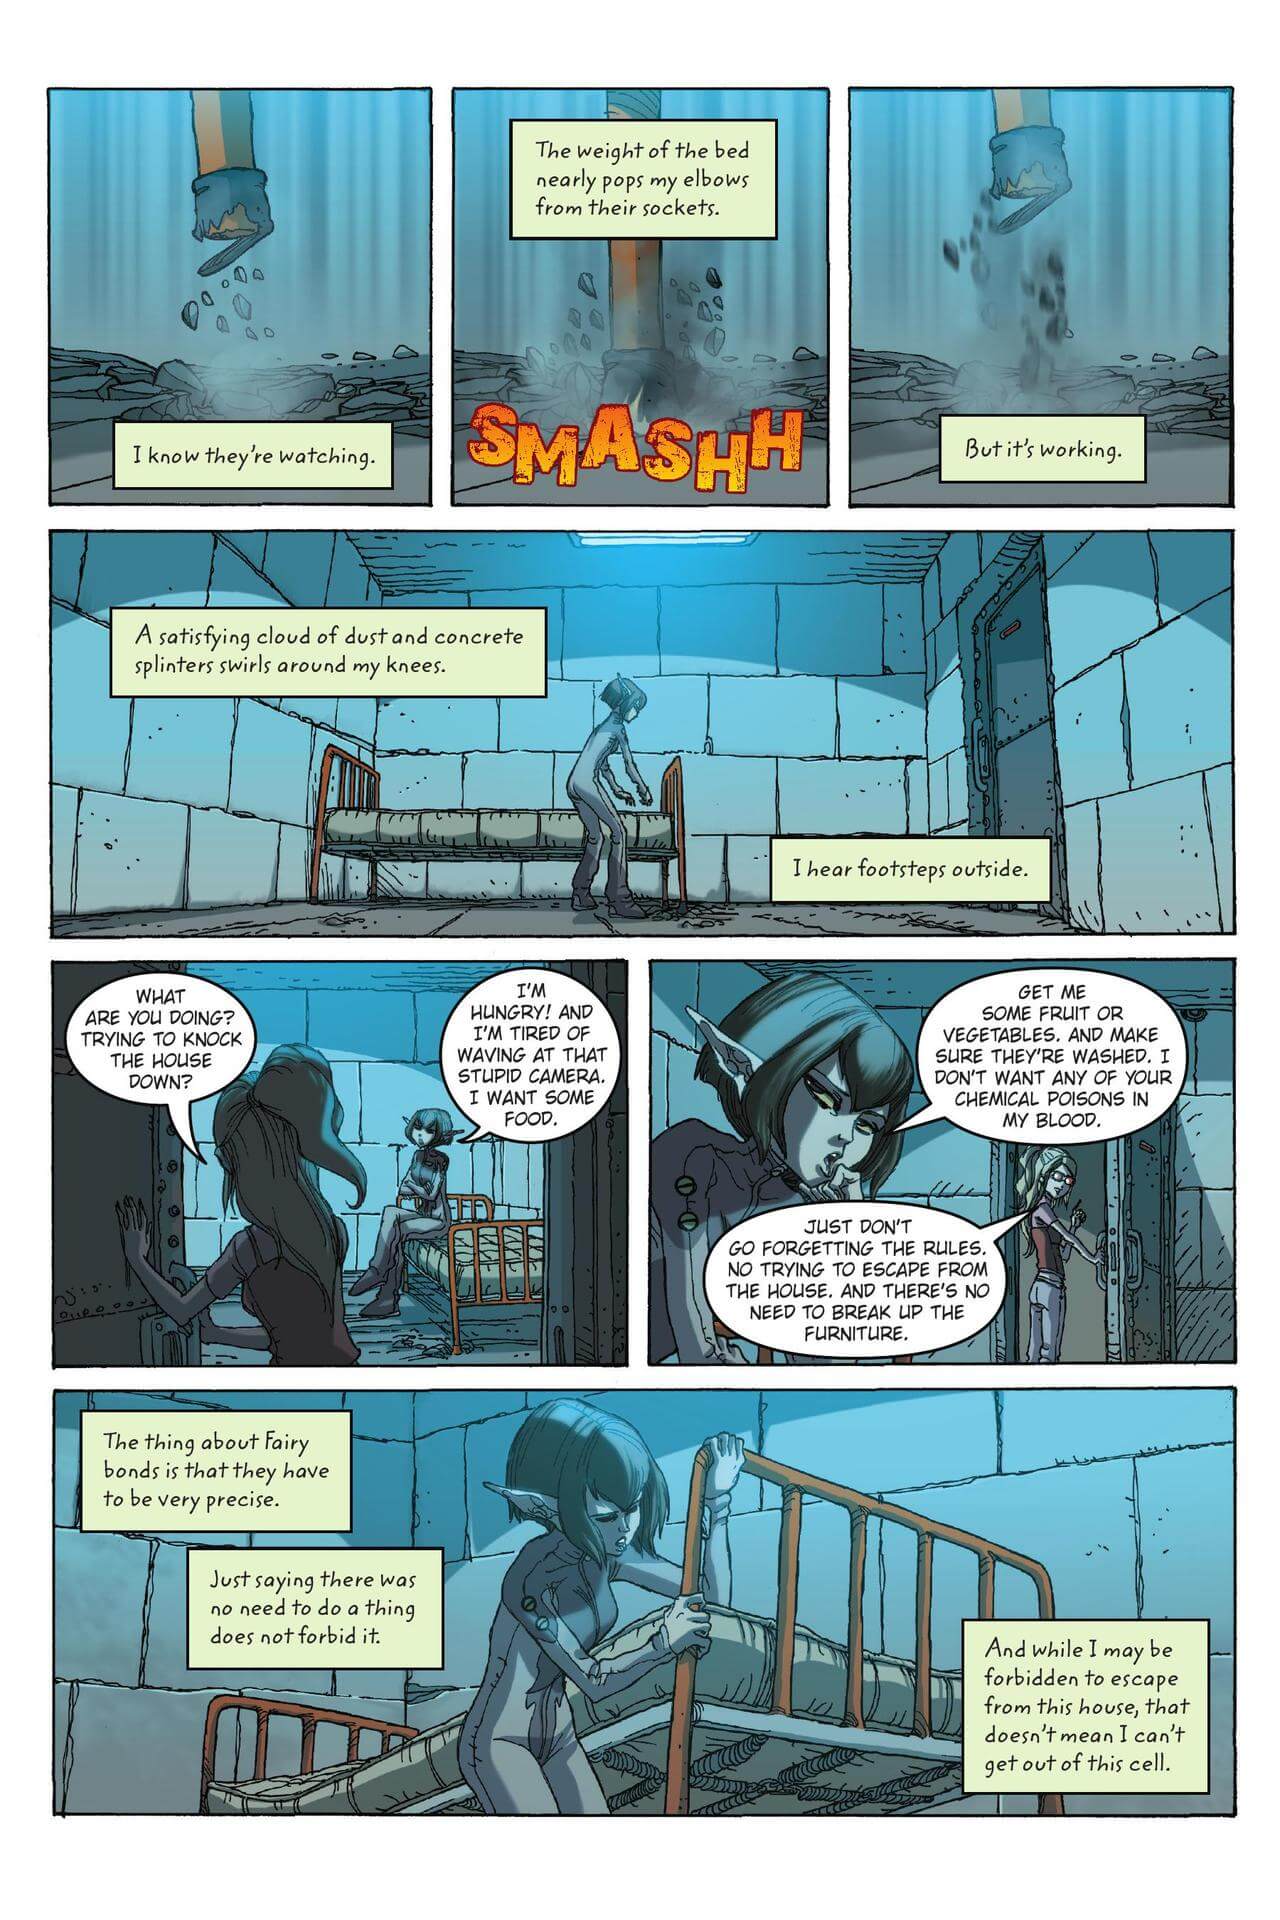 page 57 of artemis fowl the graphic novel